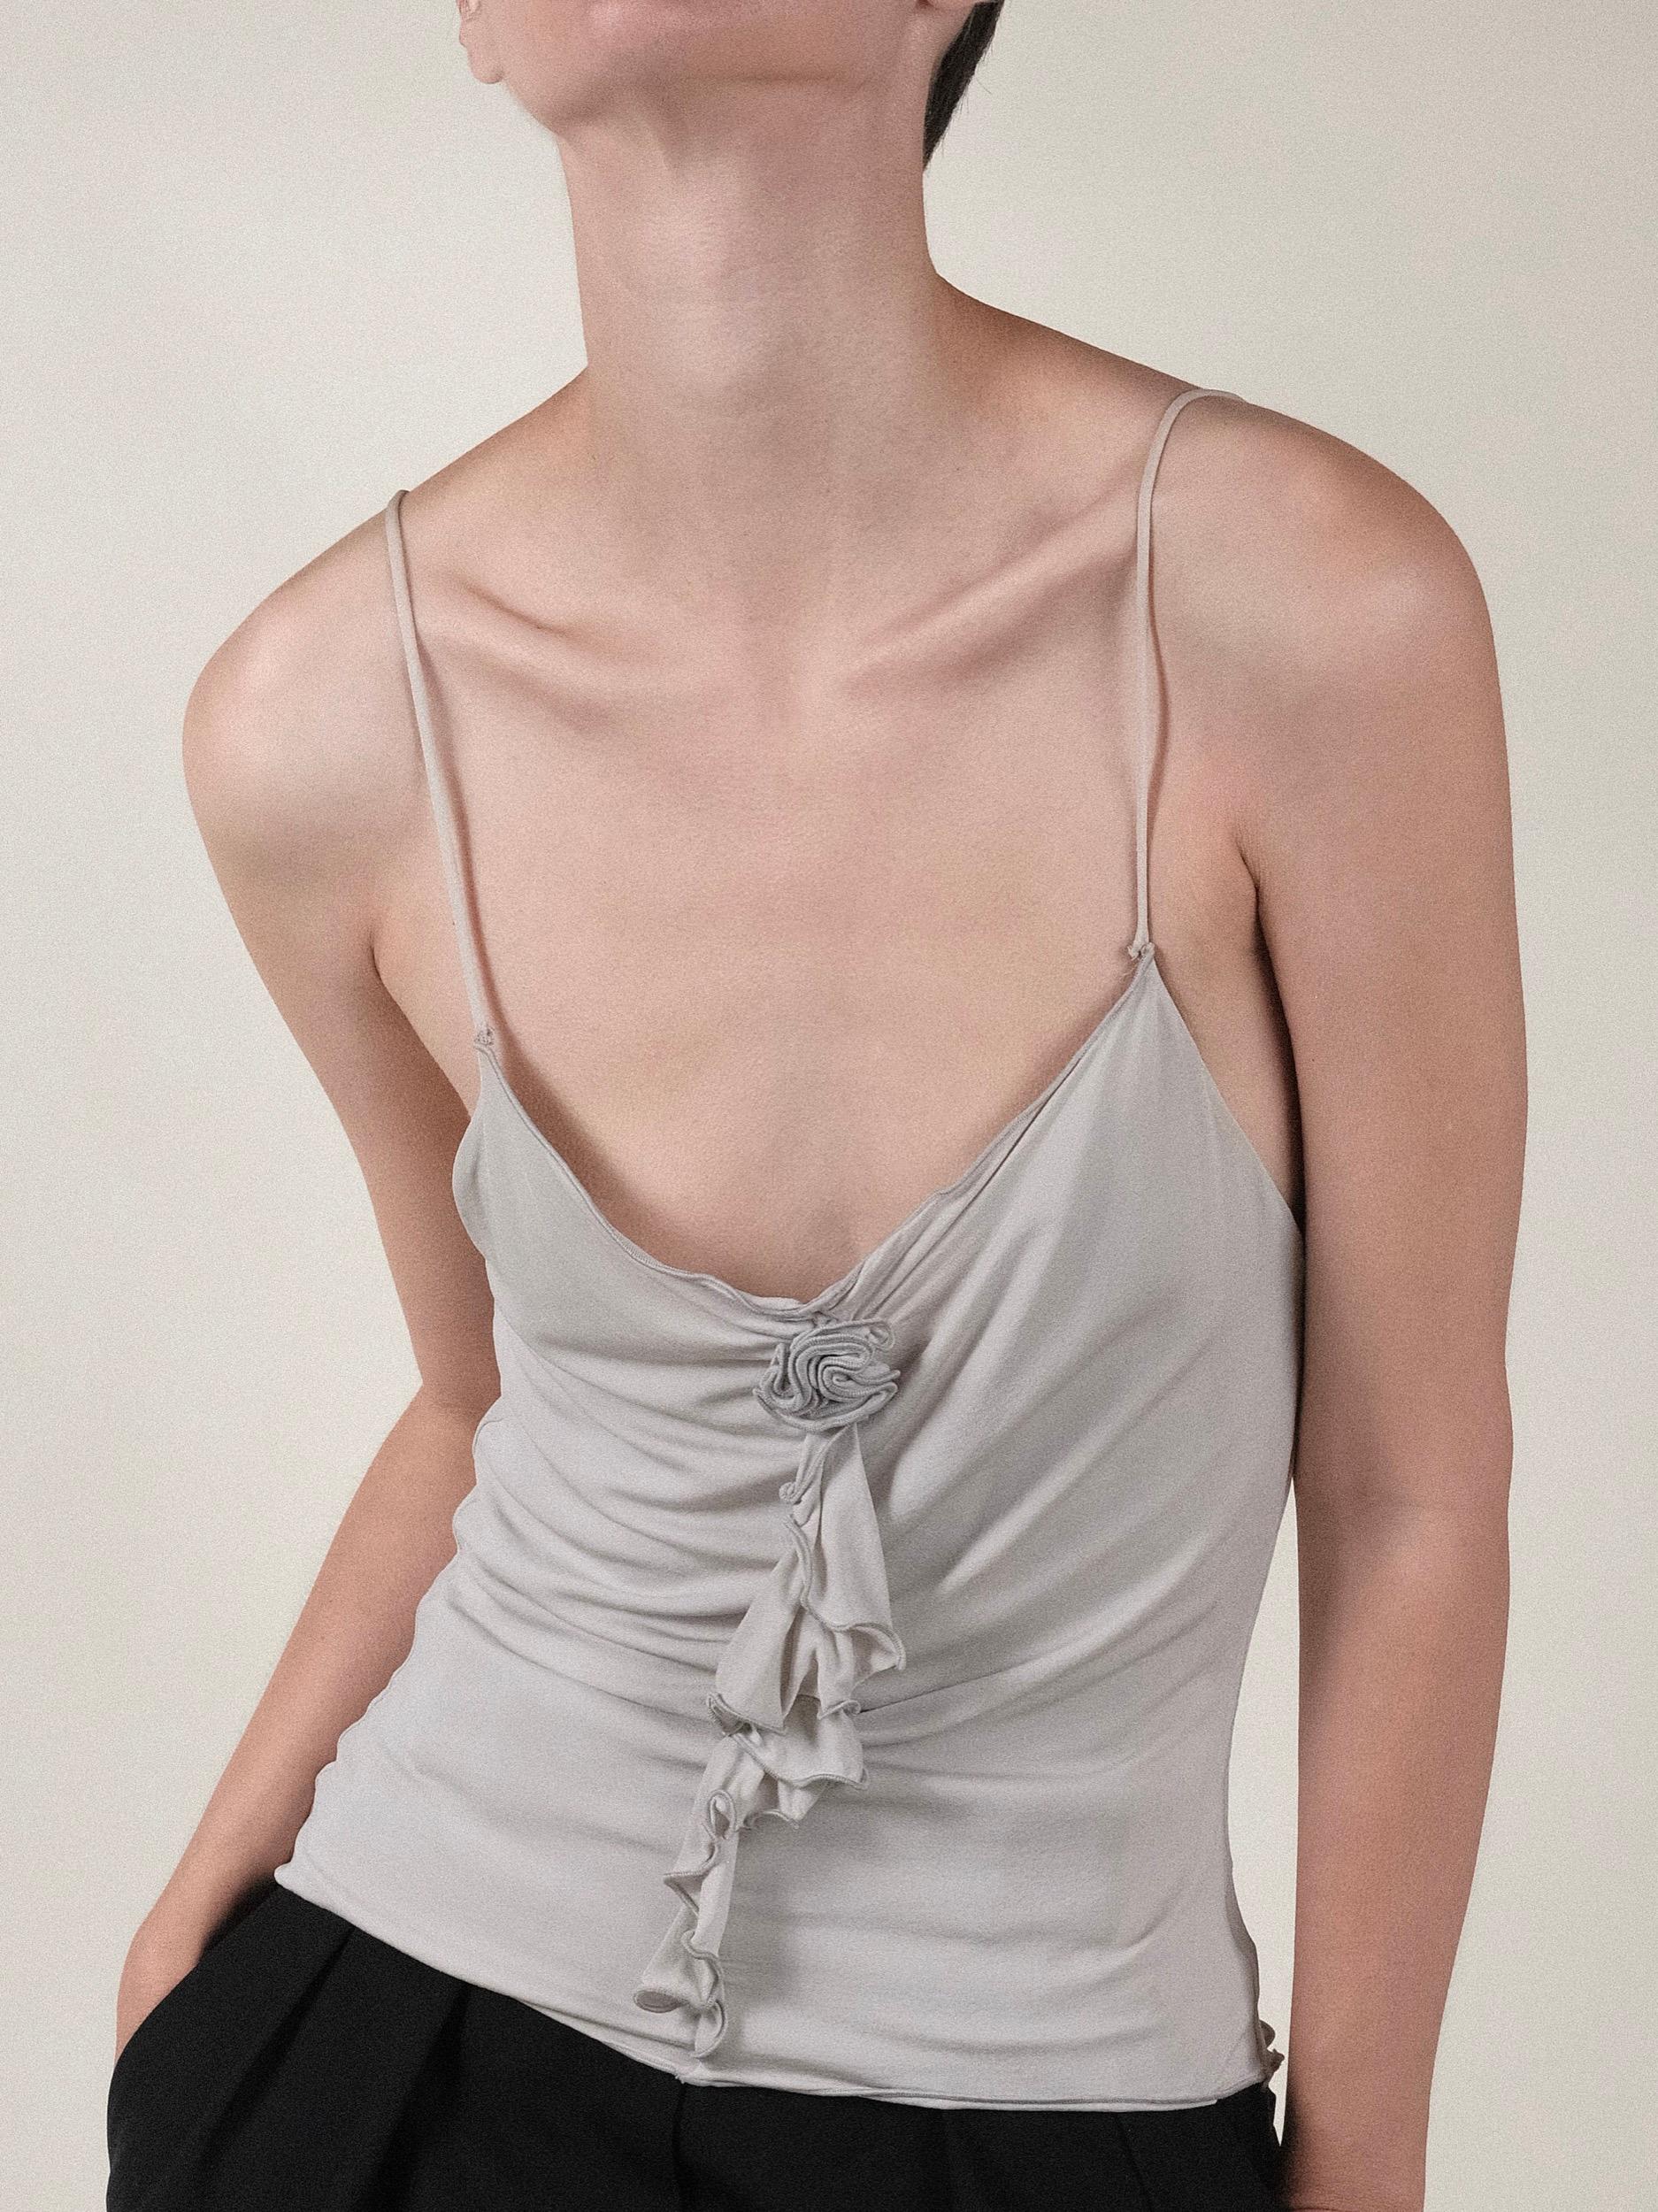 Vintage 1990's Girgio Amani Camisole Tank Top with ruffle and rose detailing
Light, icy, grey
Double layered with bonded seam
Seam detailing down back
Skinny spaghetti strap
Heavy lux viscose
Rolled and expertly finished strap

Flat